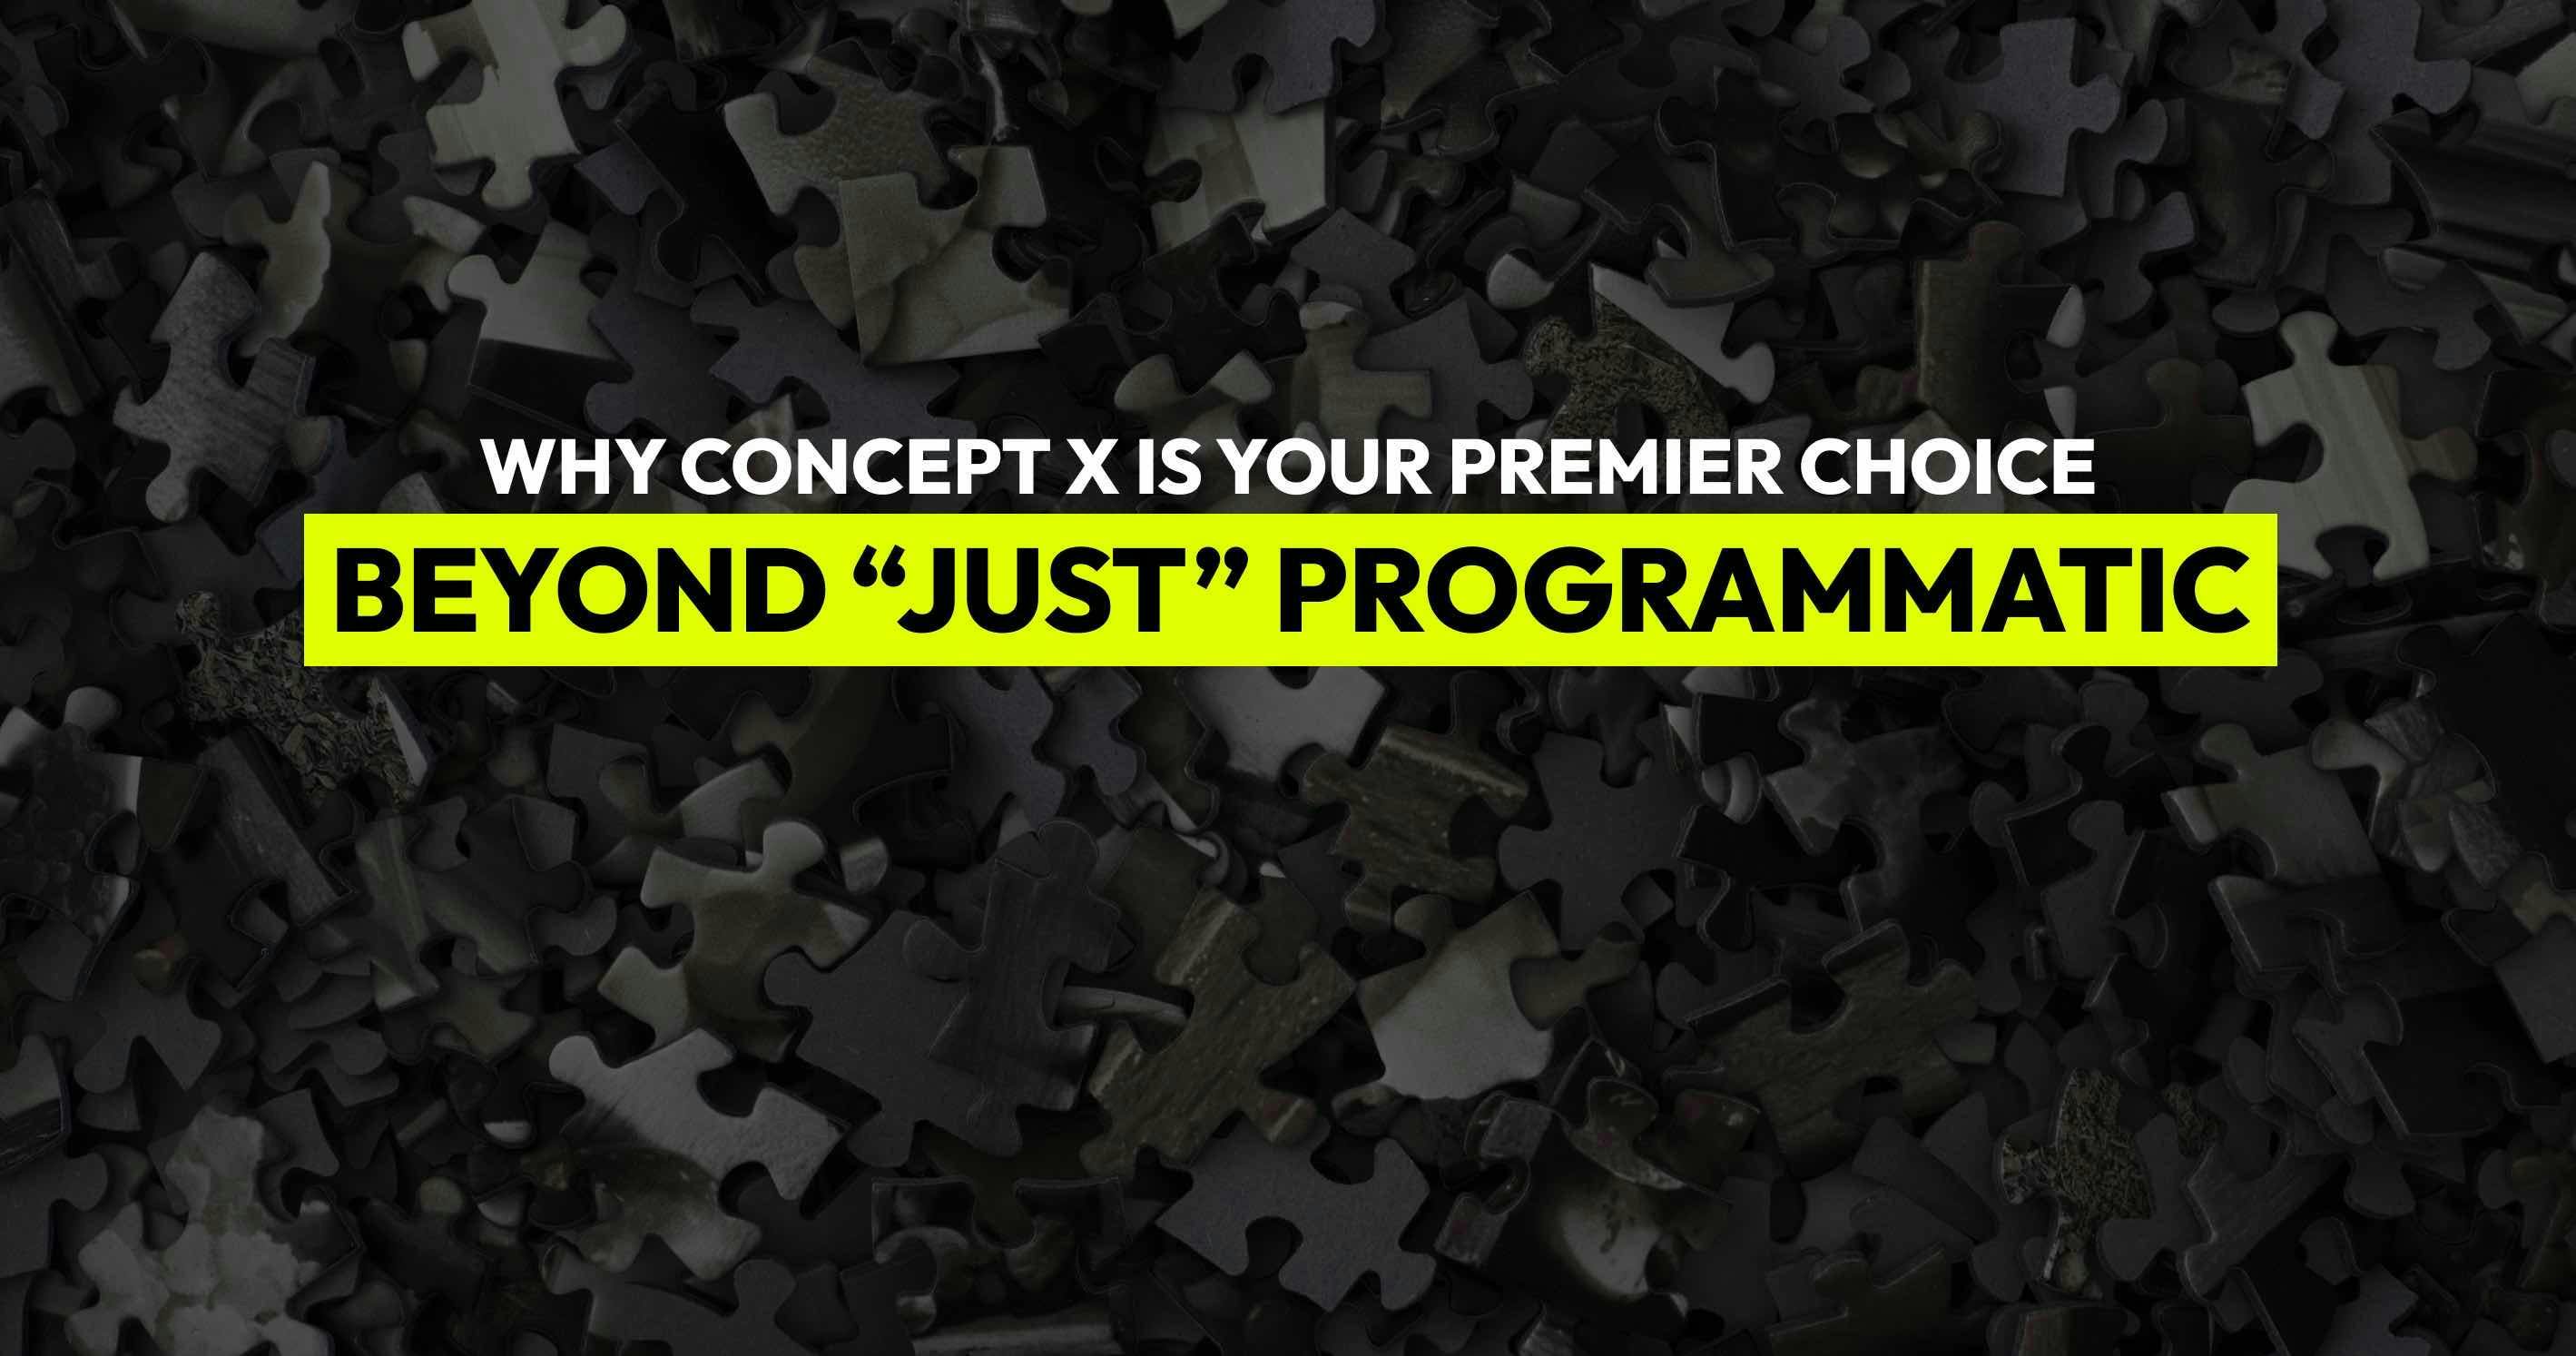 An image for a blog post titled Why Concept X is Your Premier Choice Beyond "Just" Programmatic